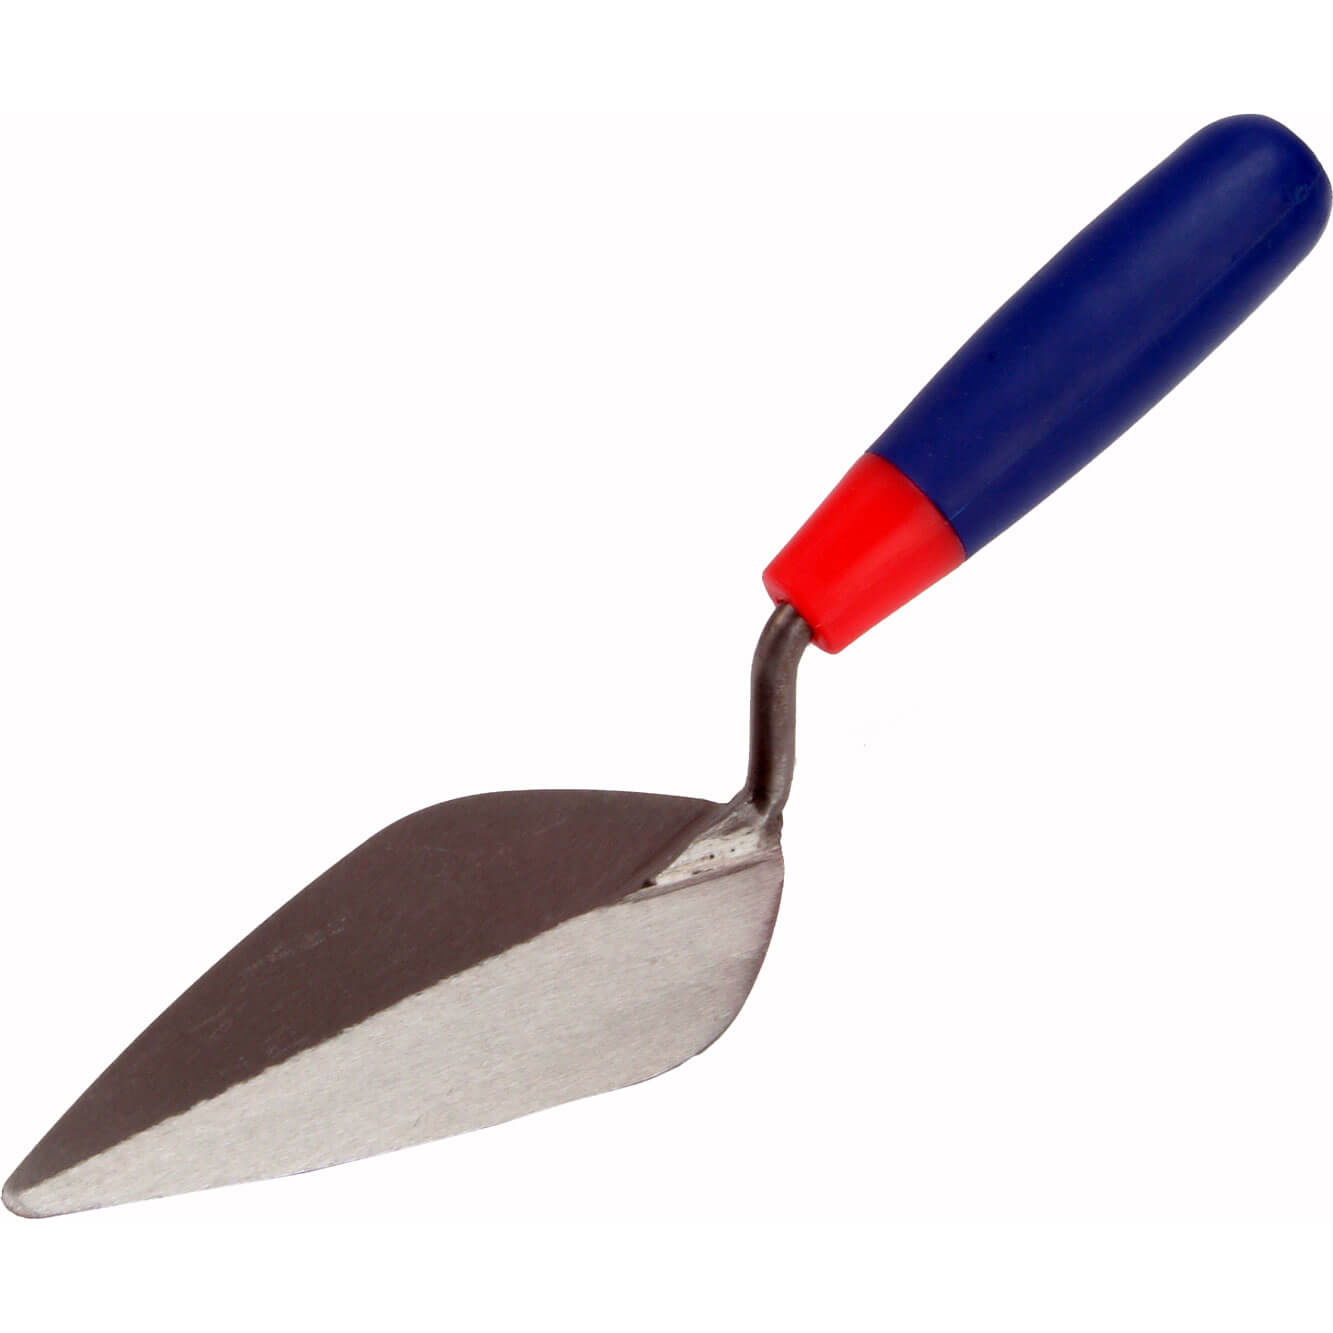 Image of RST Soft Touch London Pattern Pointing Trowel 6"